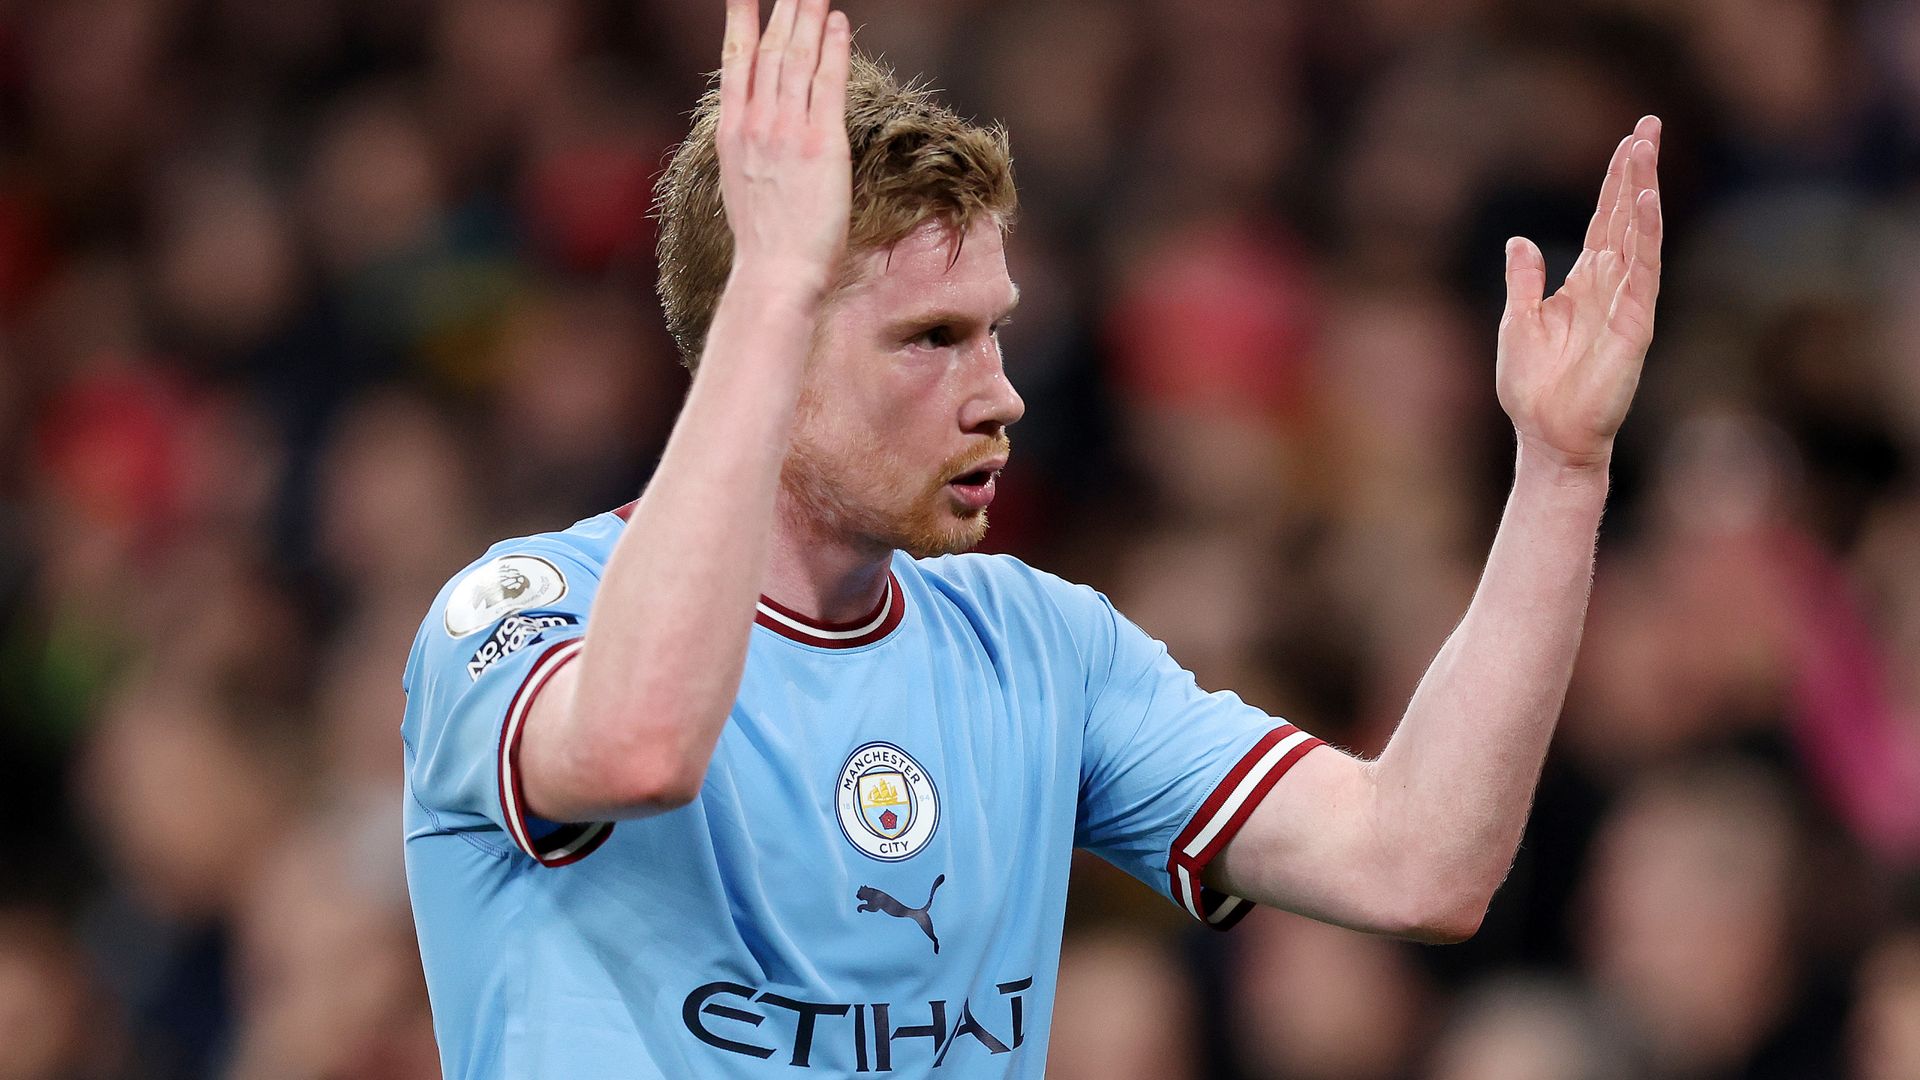 FA to investigate Arsenal after objects thrown at De Bruyne